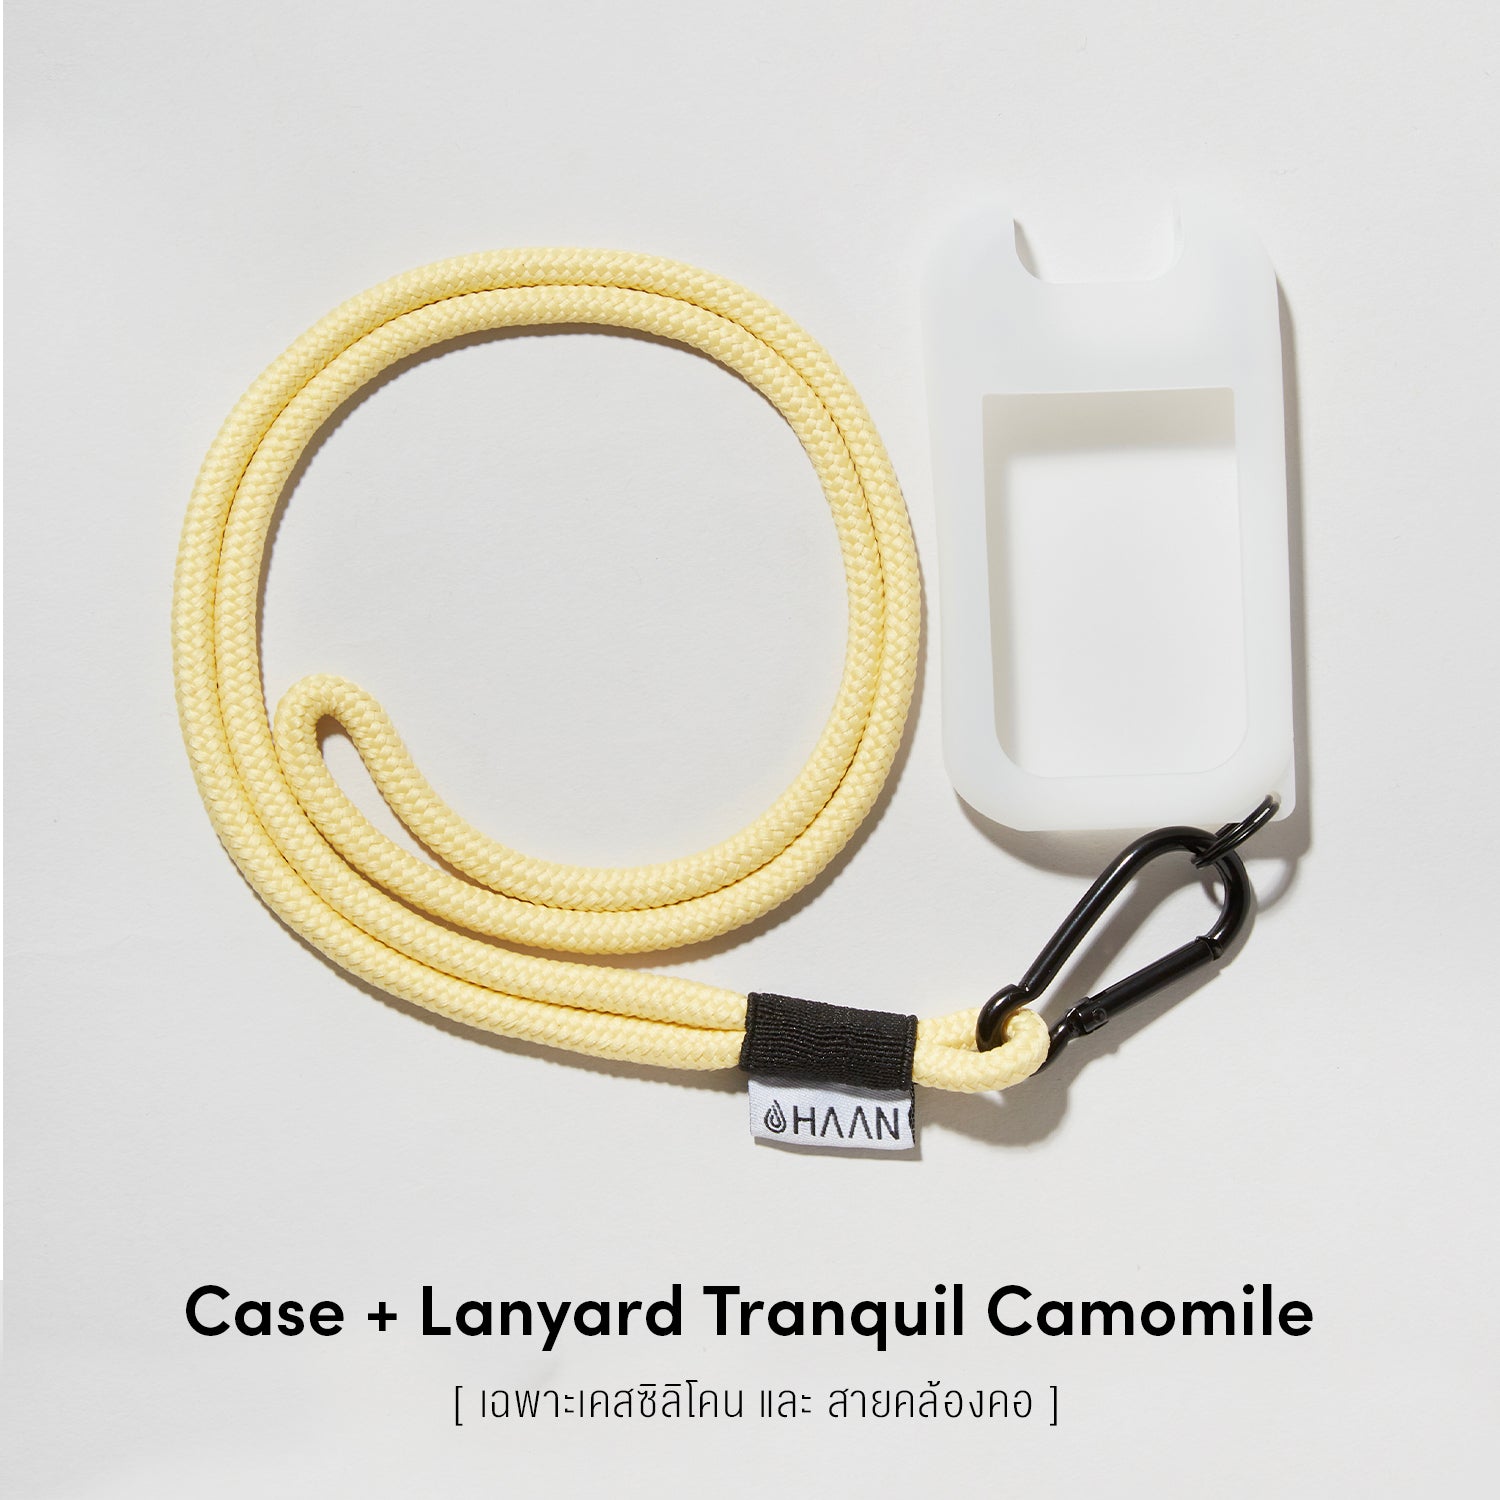 HAAN Case+Lanyard - Tranquil Camomile